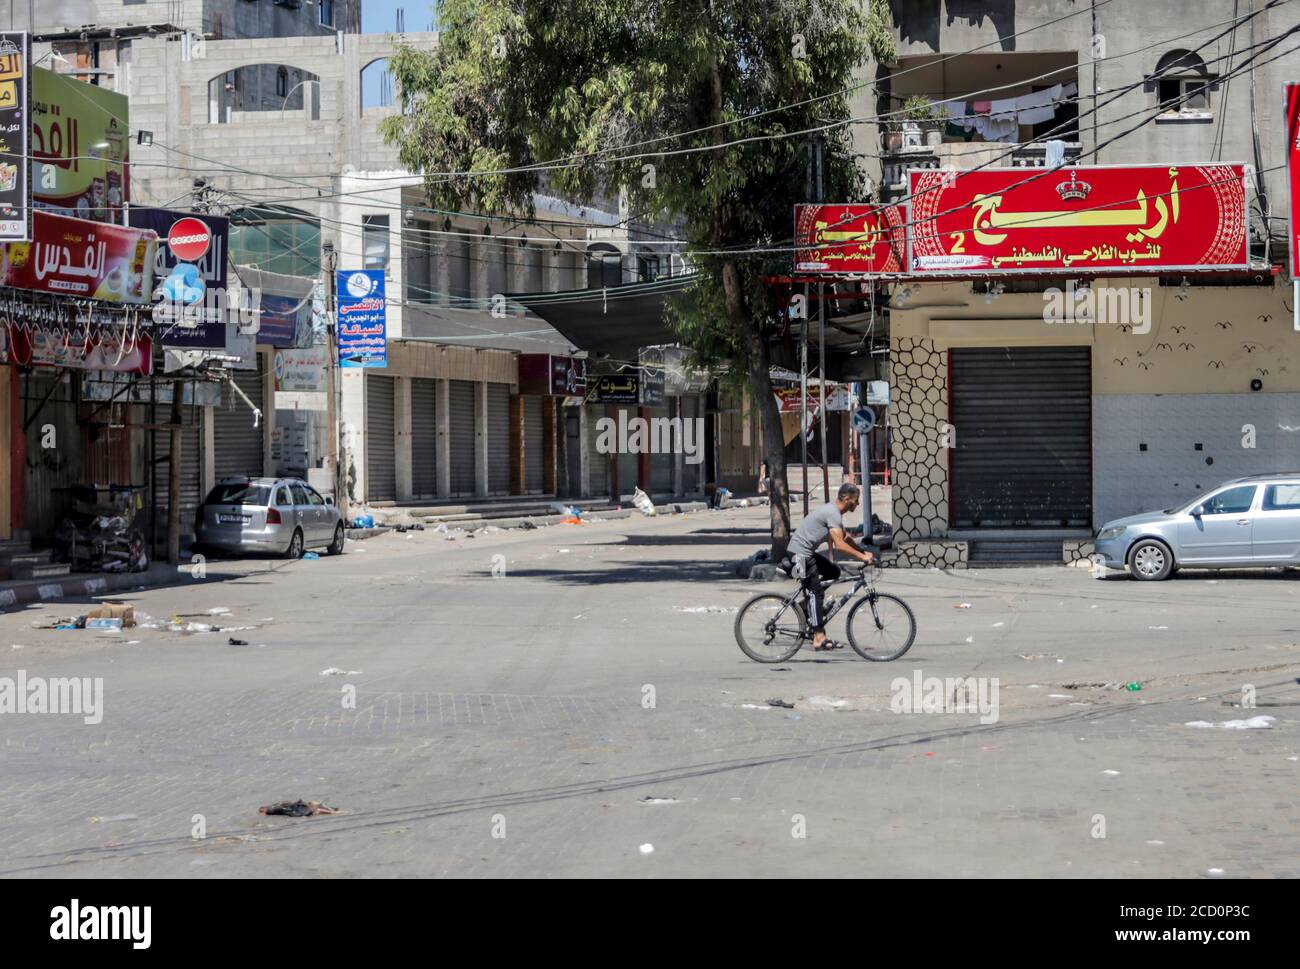 Gaza, Palestine. 25th Aug, 2020. A cyclist rides along a deserted street during the Coronavirus (COVID-19) lockdown .Gaza reported its first cases in the general population as authorities confirmed four infections at a refugee camp and security forces declared a full lockdown for 48 hours. The four cases were from a single family, according to a government statement. The closure would affect the entire Gaza Strip, according to an official from Hamas, the group that governs the territory. Credit: SOPA Images Limited/Alamy Live News Stock Photo